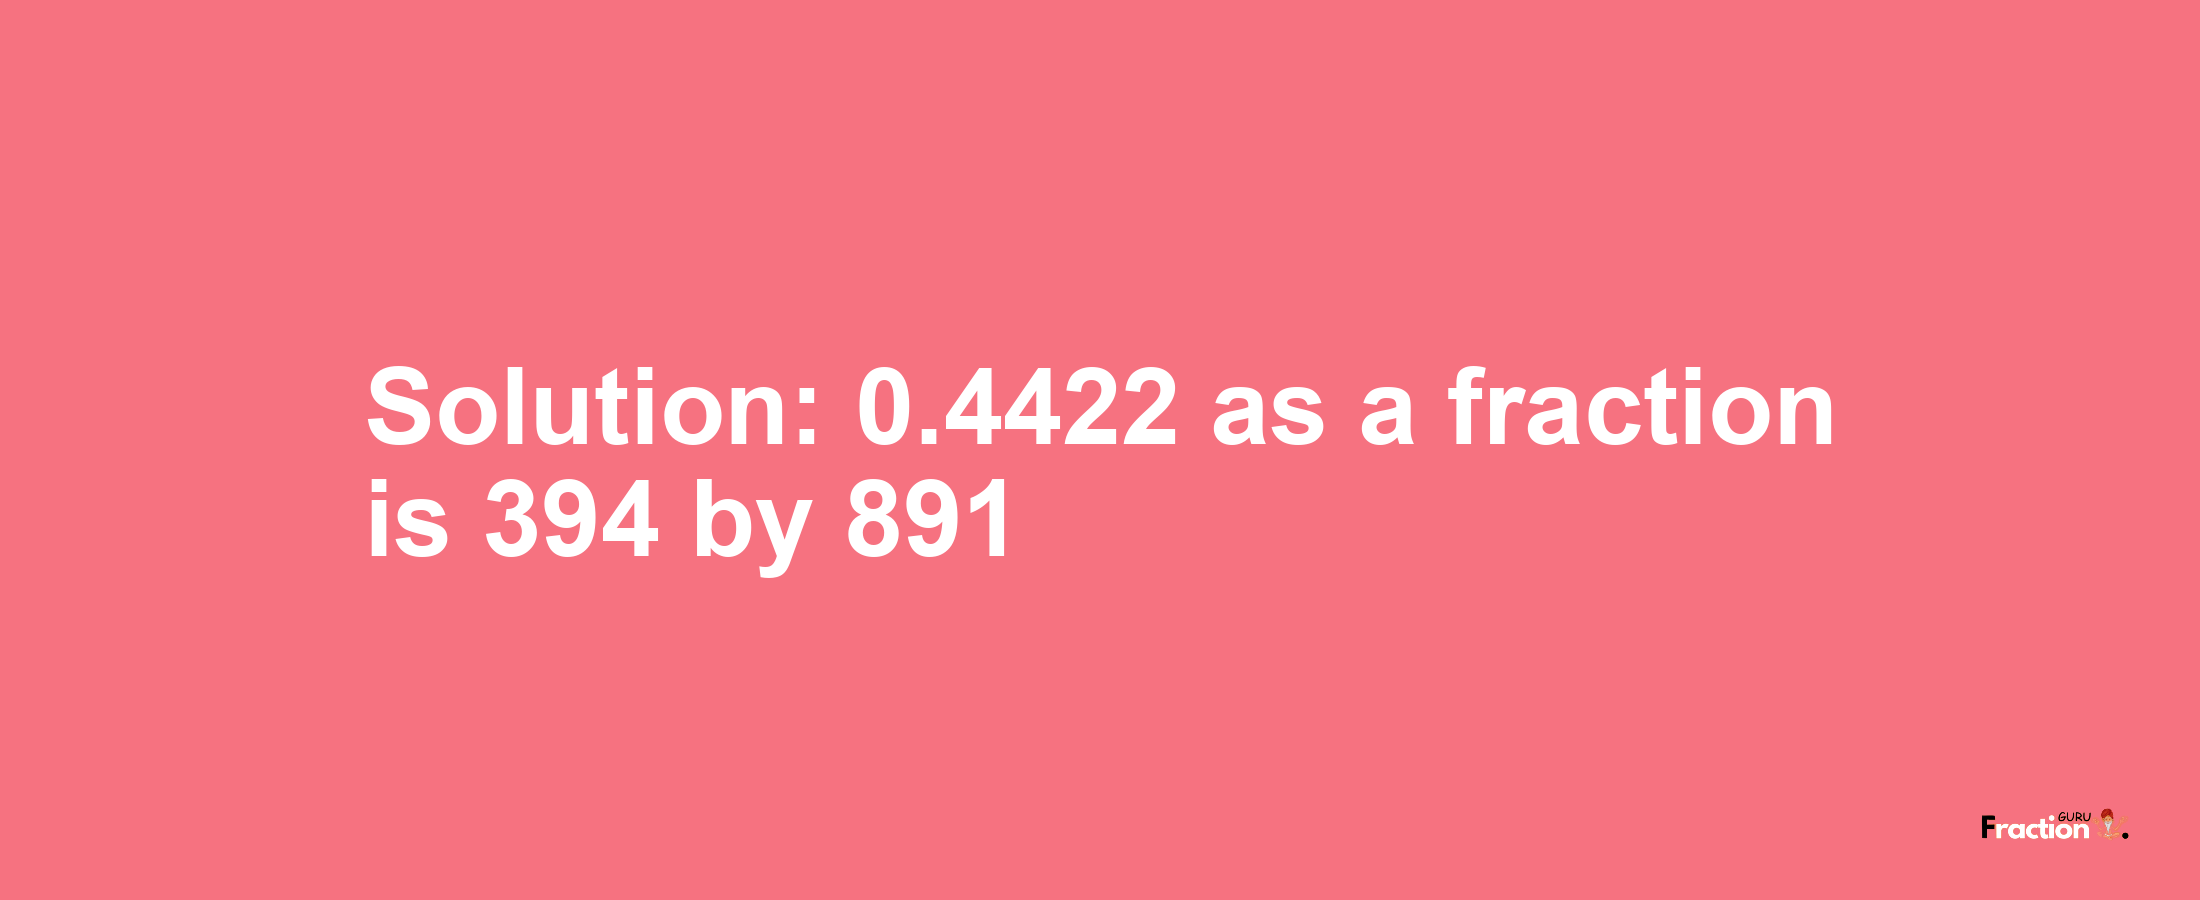 Solution:0.4422 as a fraction is 394/891